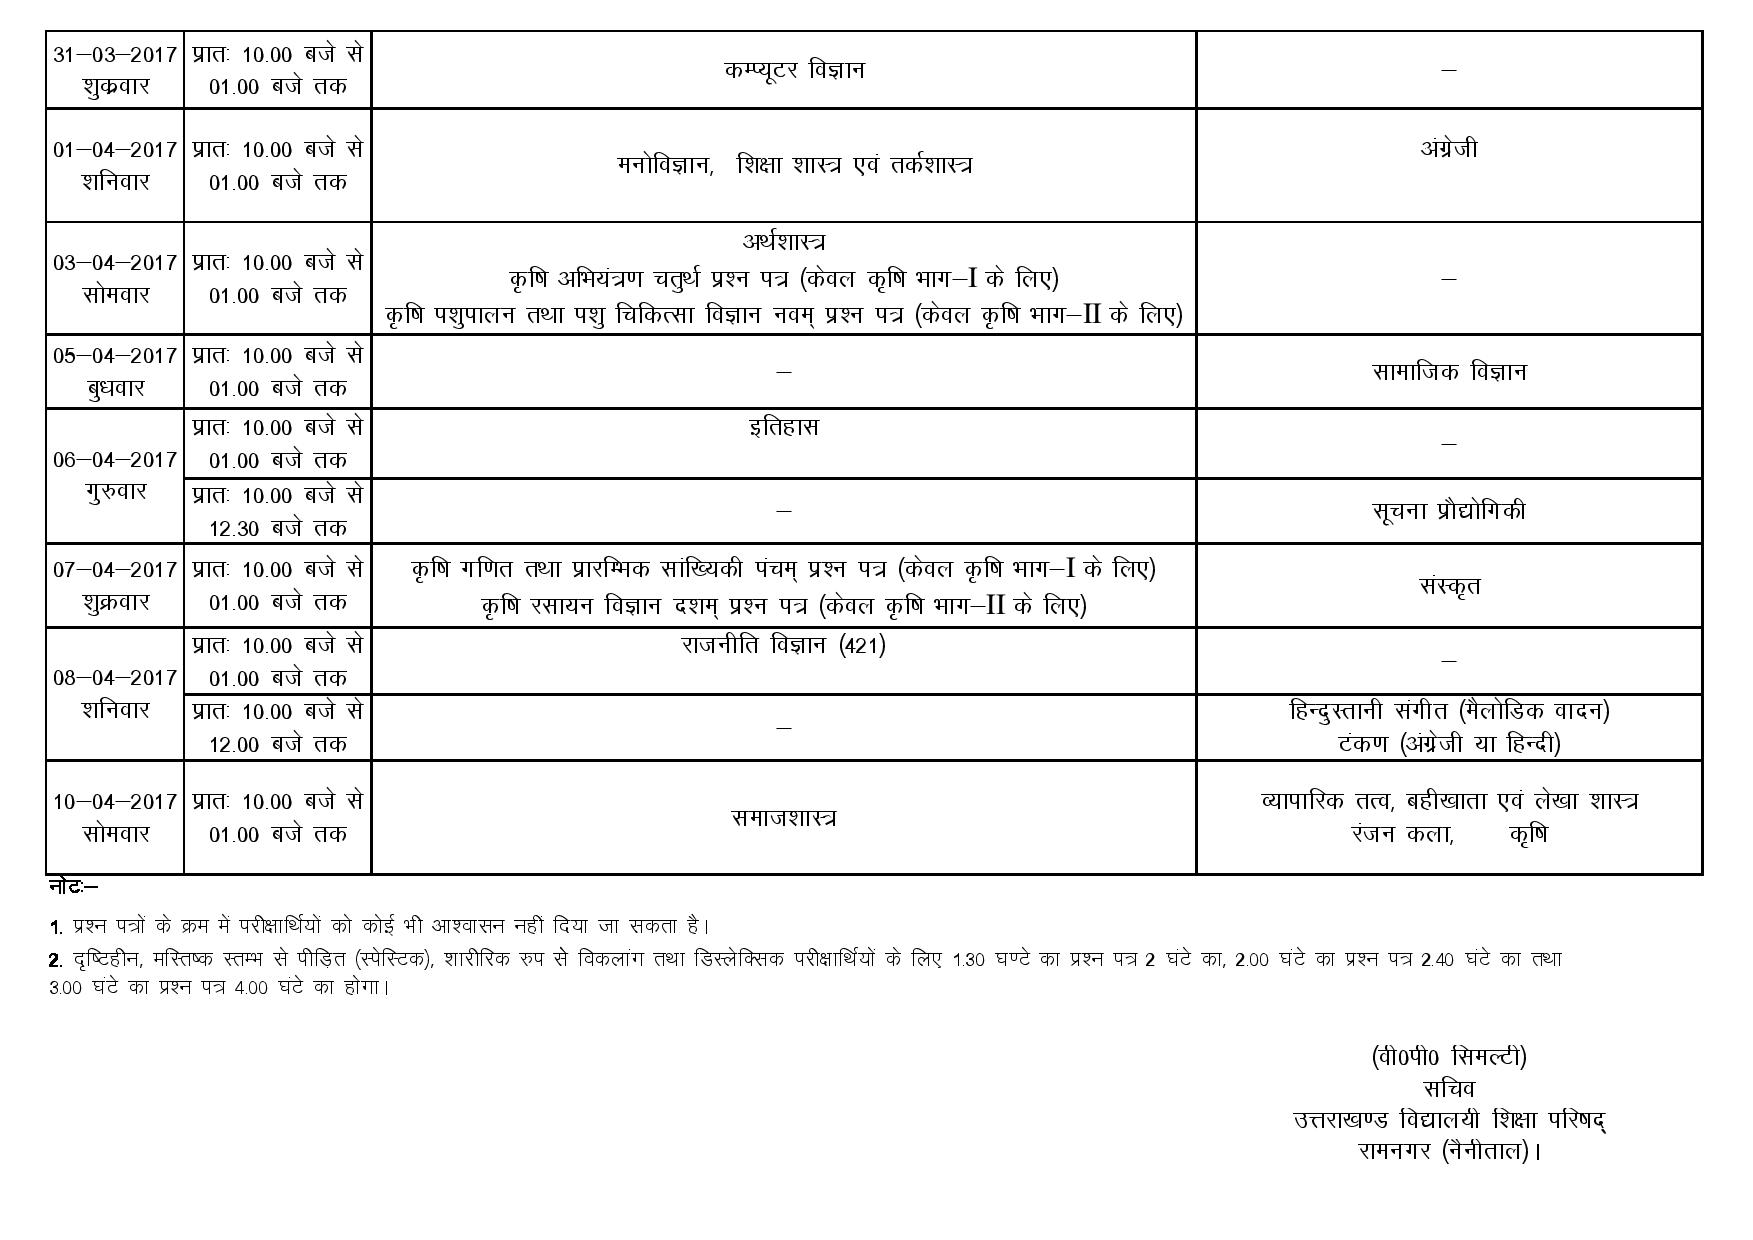 UP Board Inter 2nd year Result 2